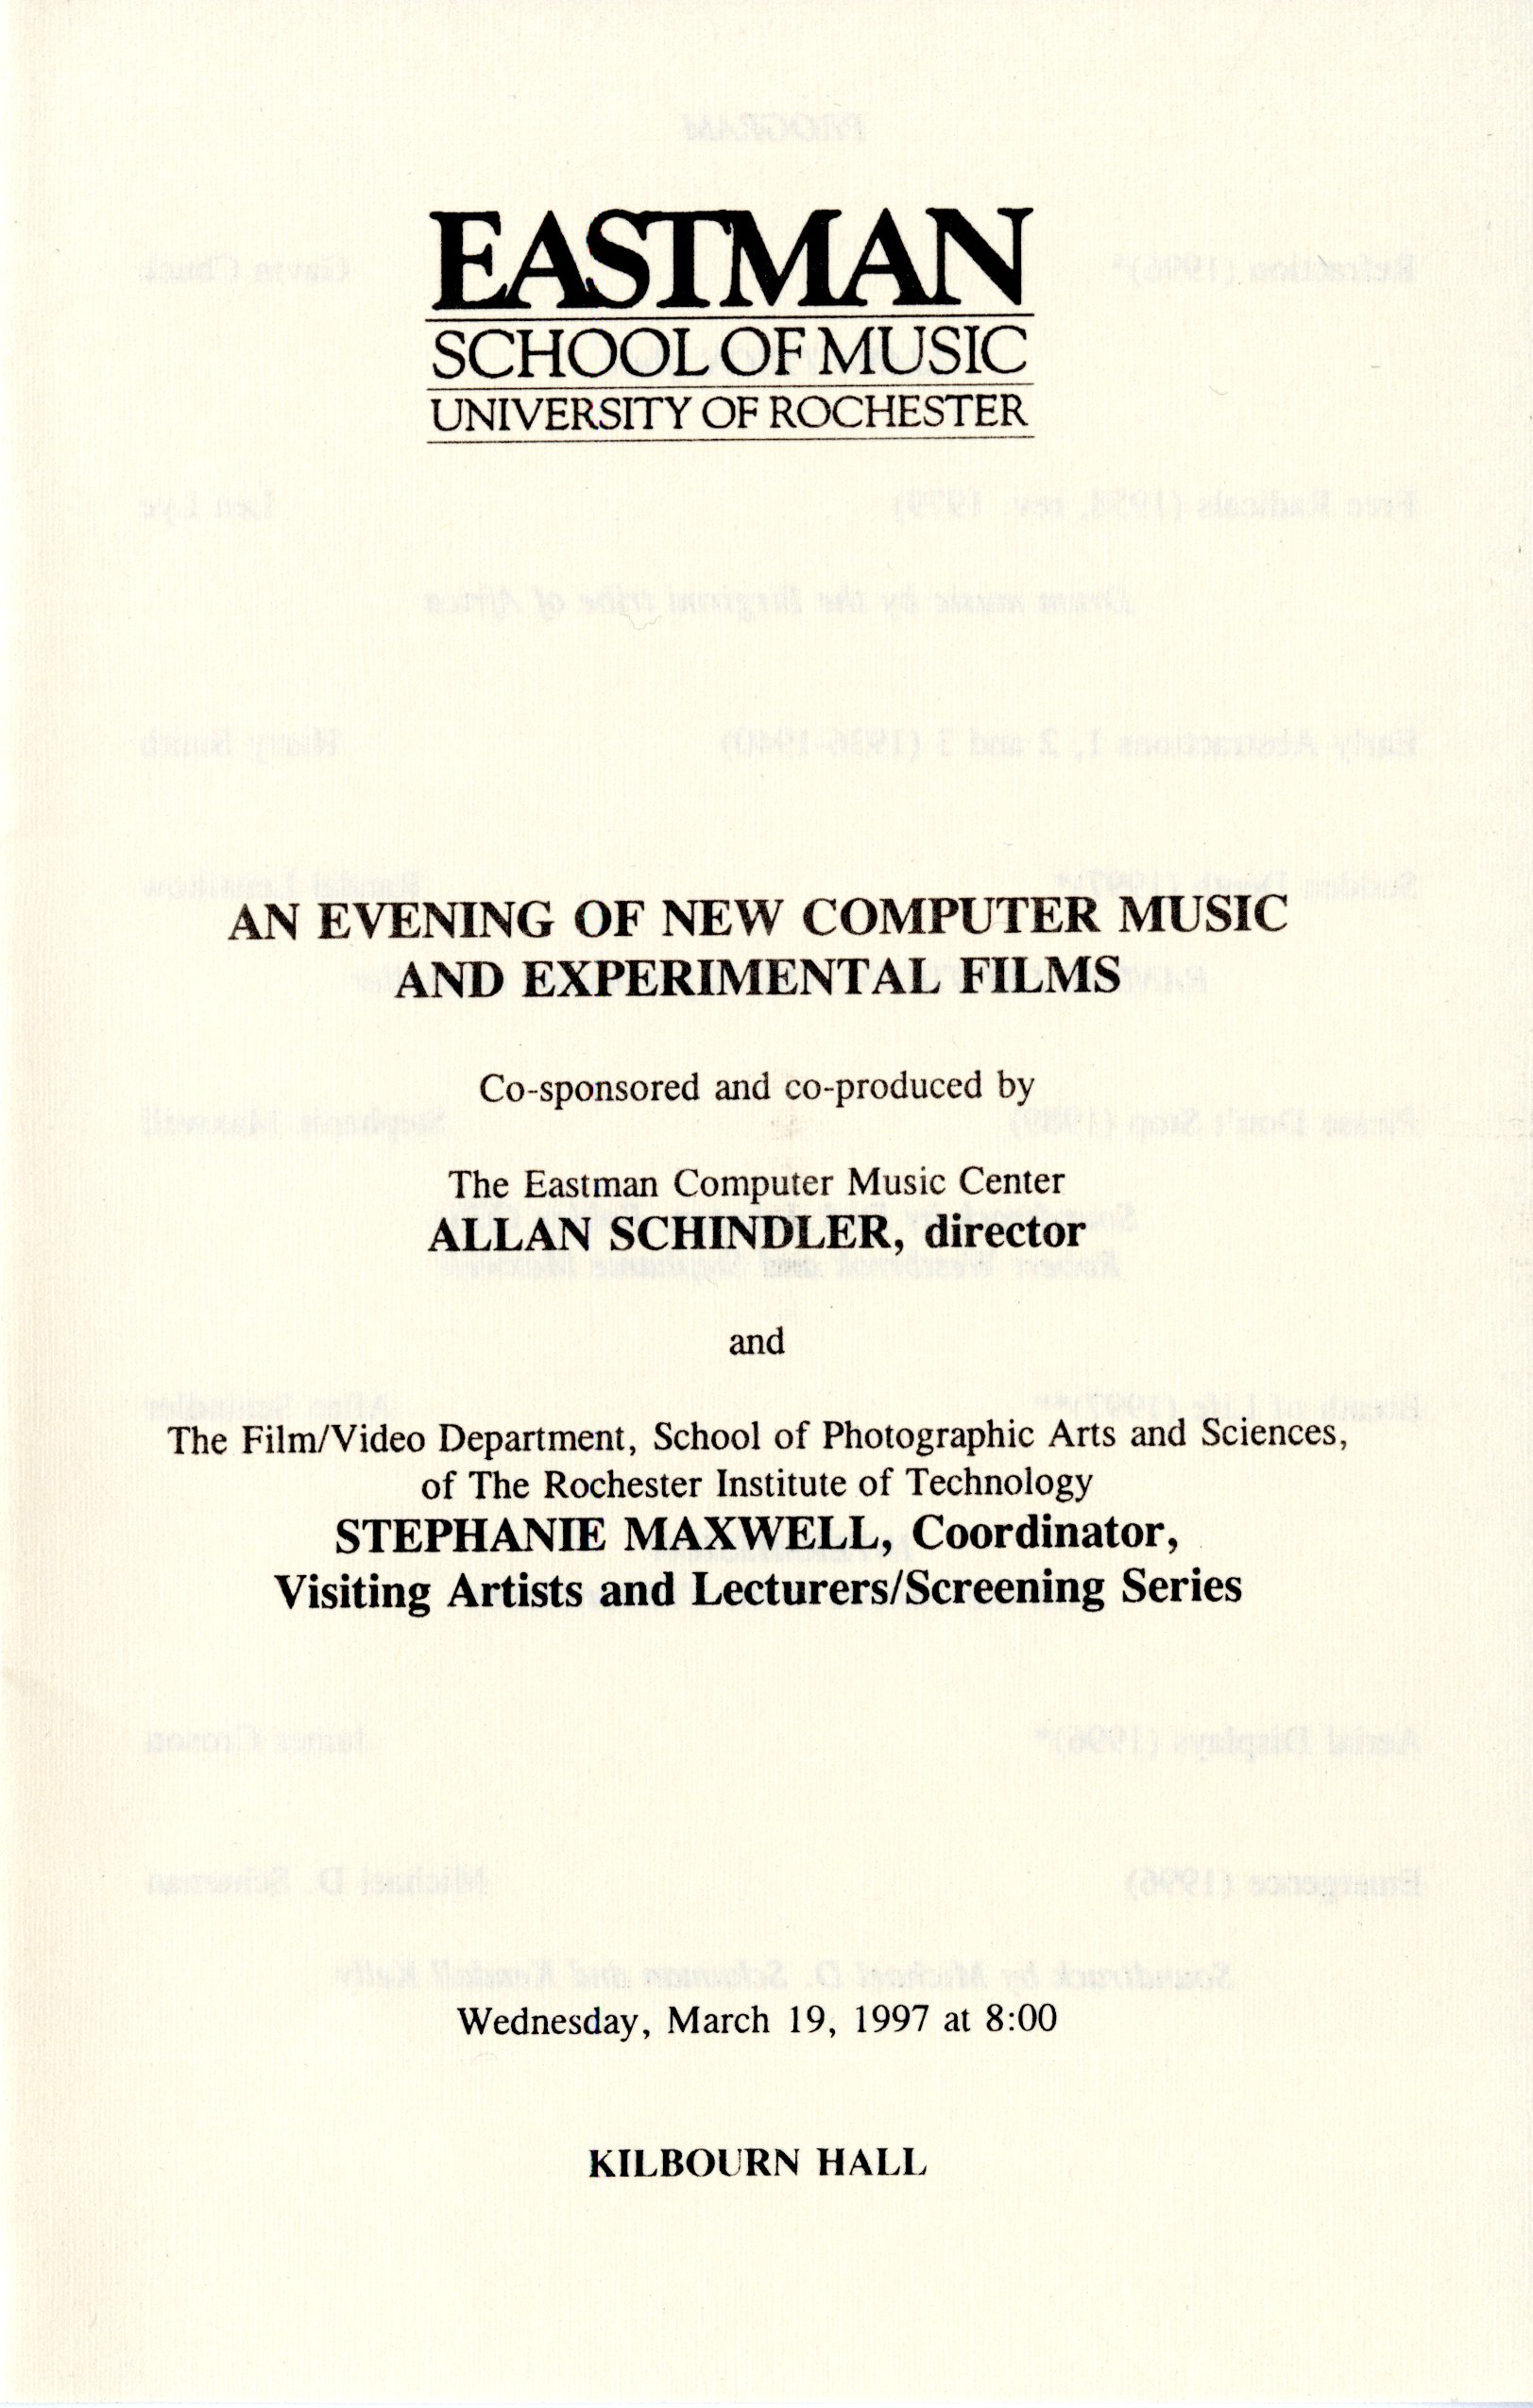 Evening of Computer Music and Films, concert program, page 01